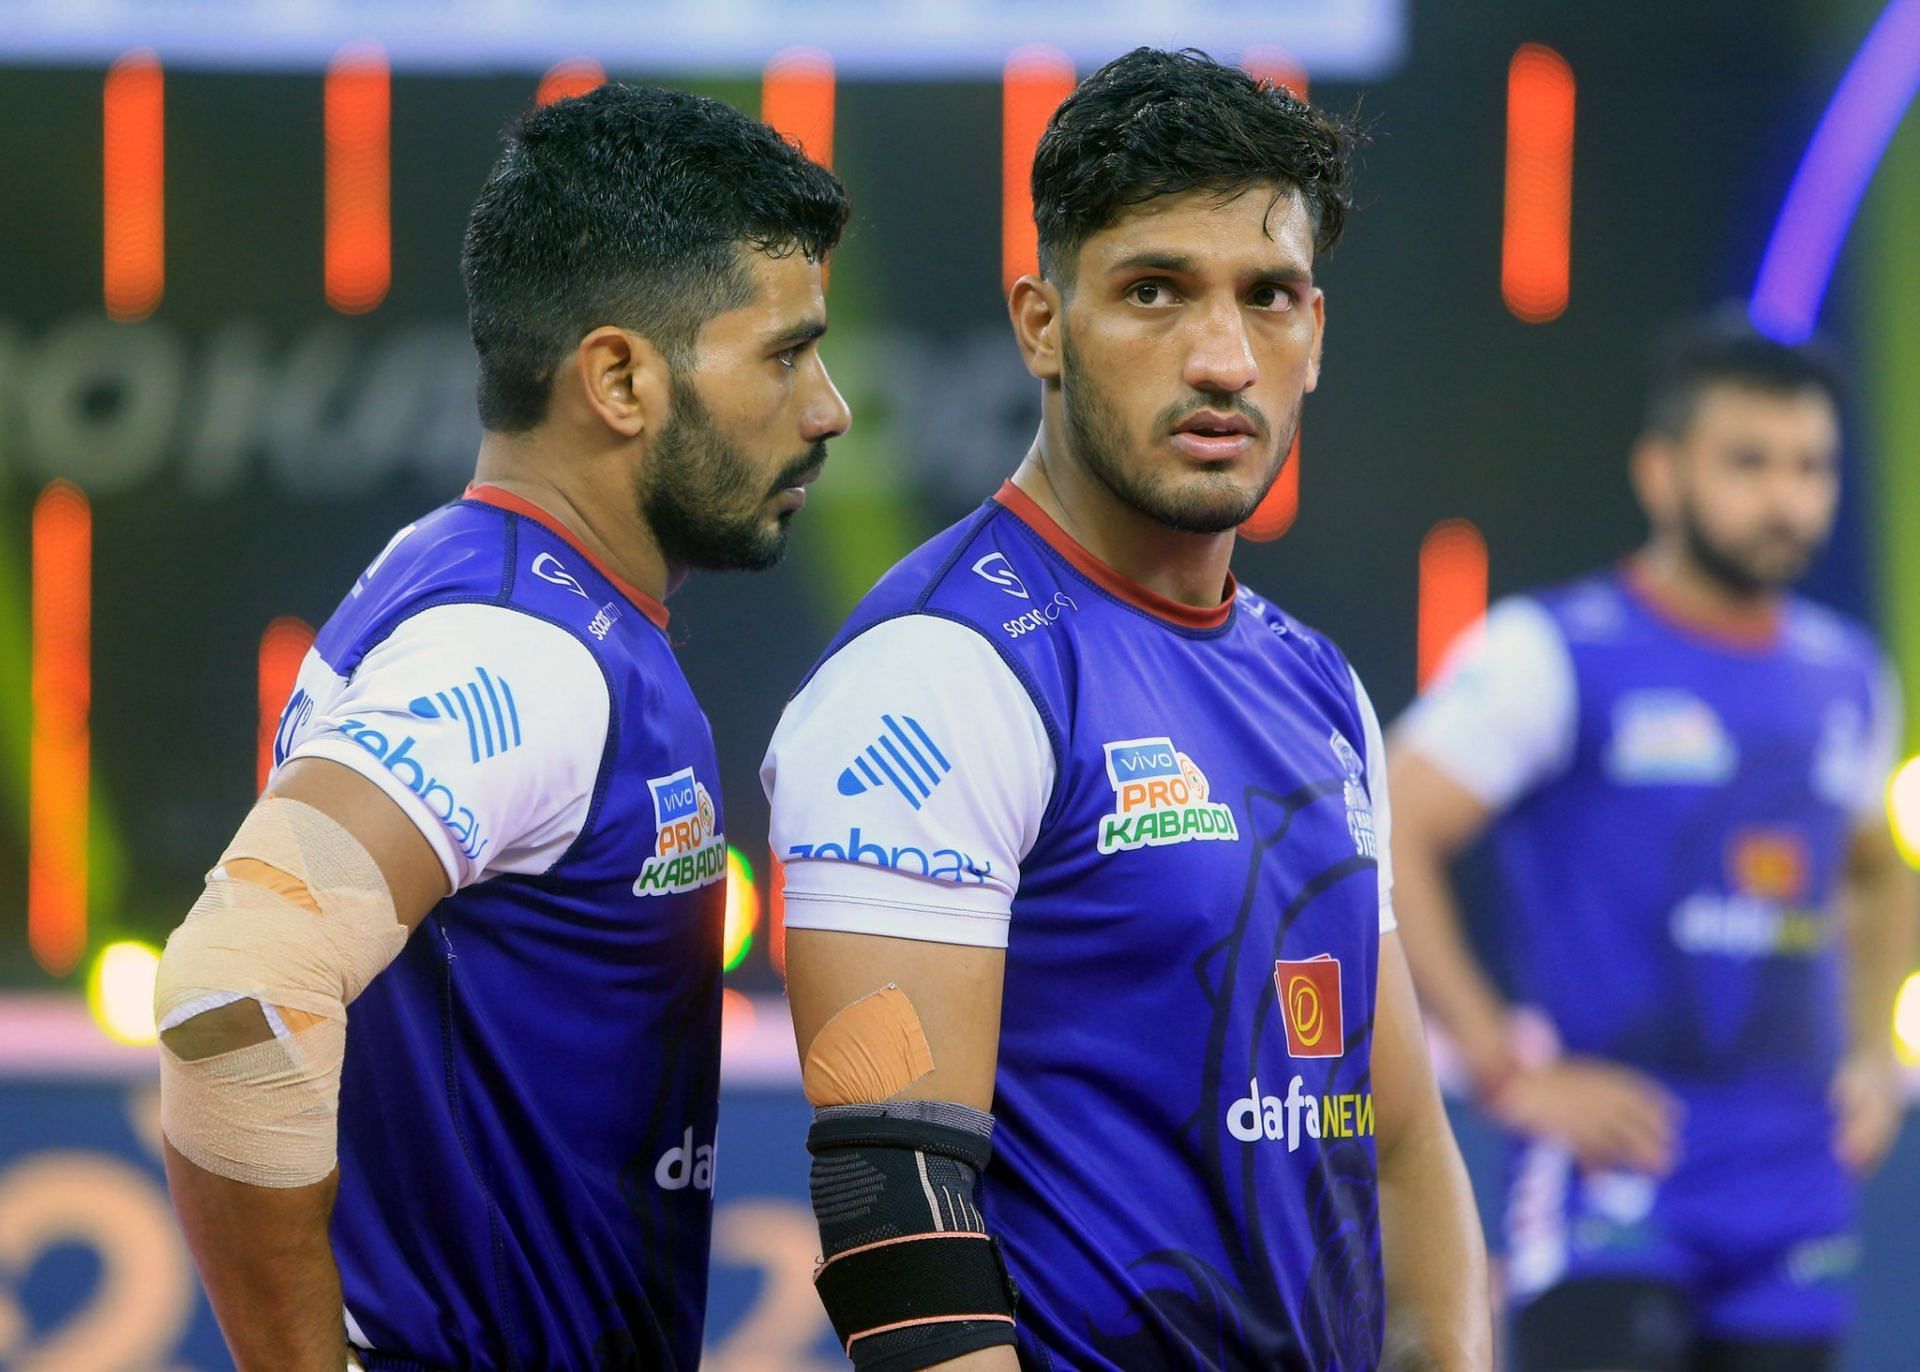 Pro Kabaddi 2022, Haryana Steelers vs Bengal Warriors: Who will win today’s PKL match and telecast details